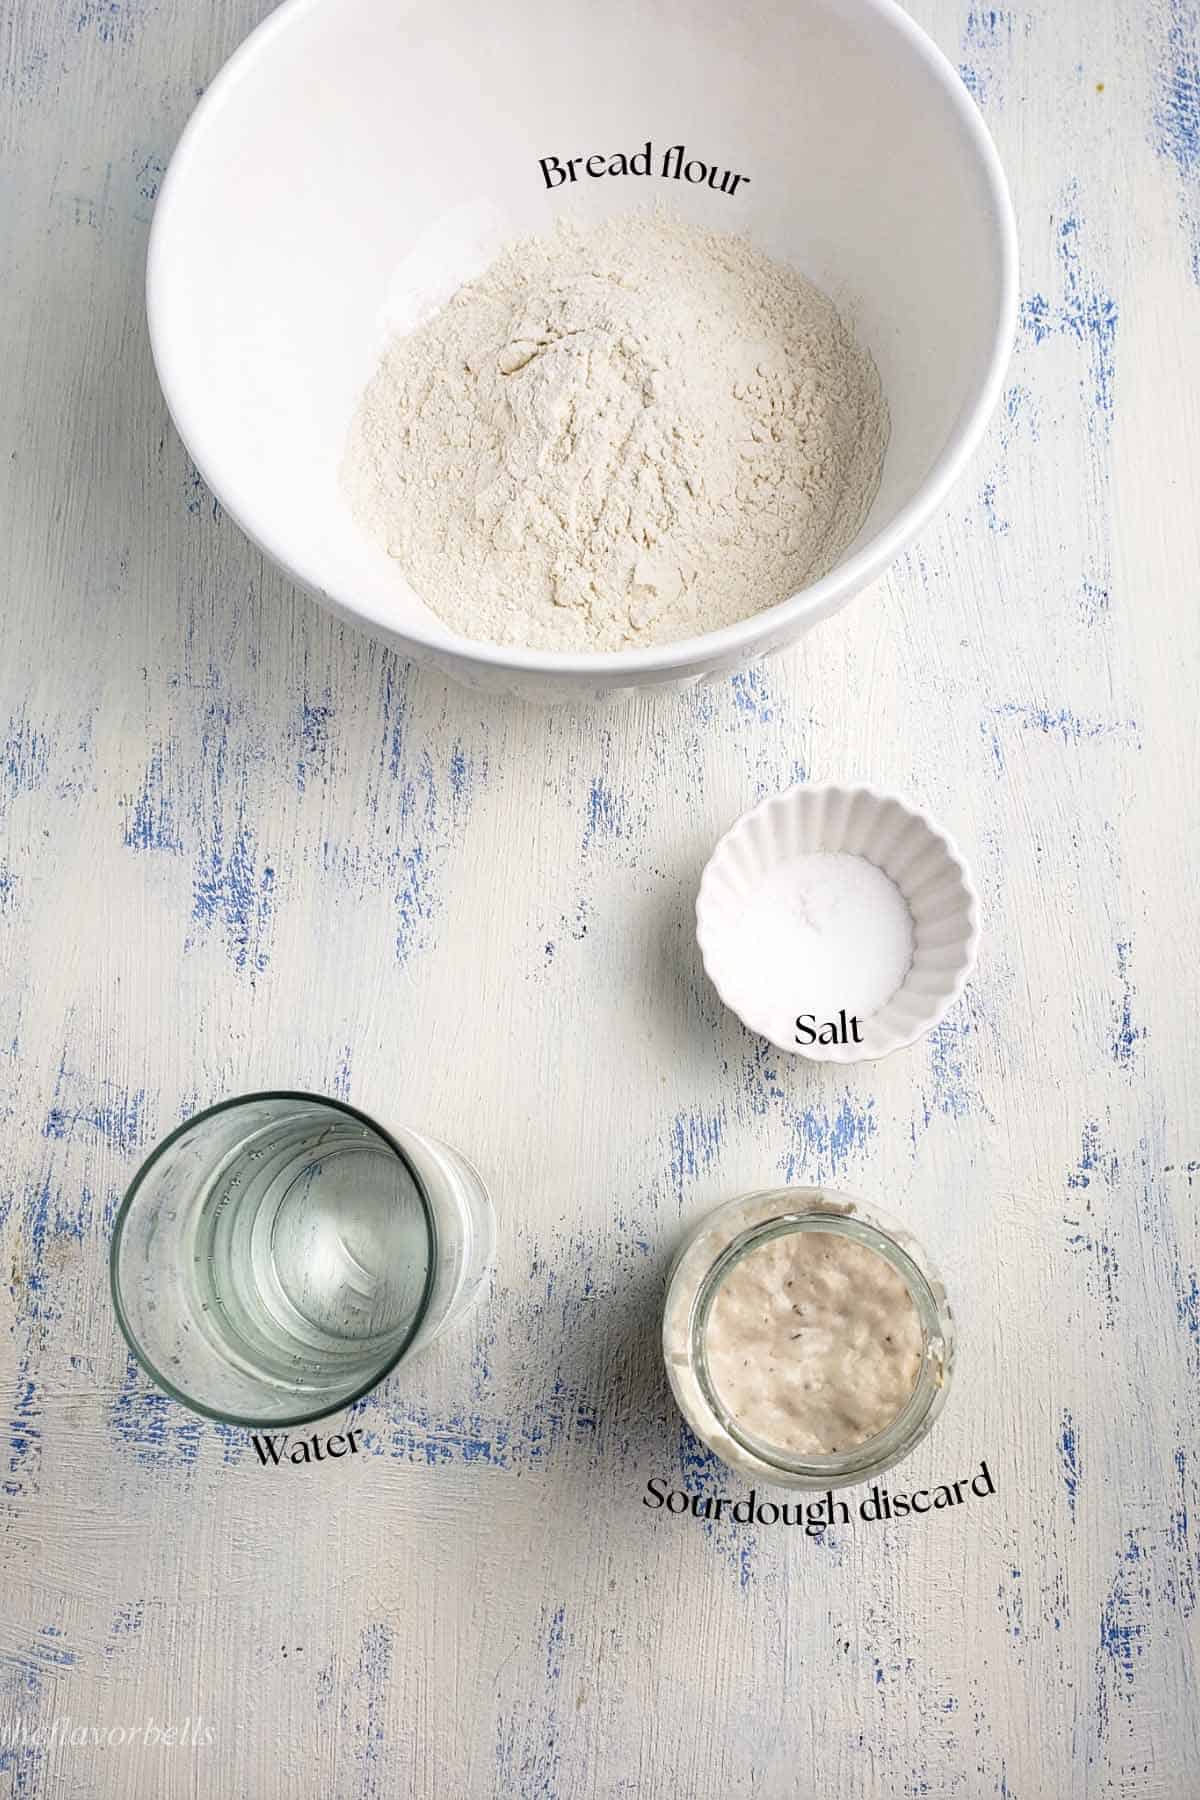 ingredients for making the sourdough bread using the refrigerated discard